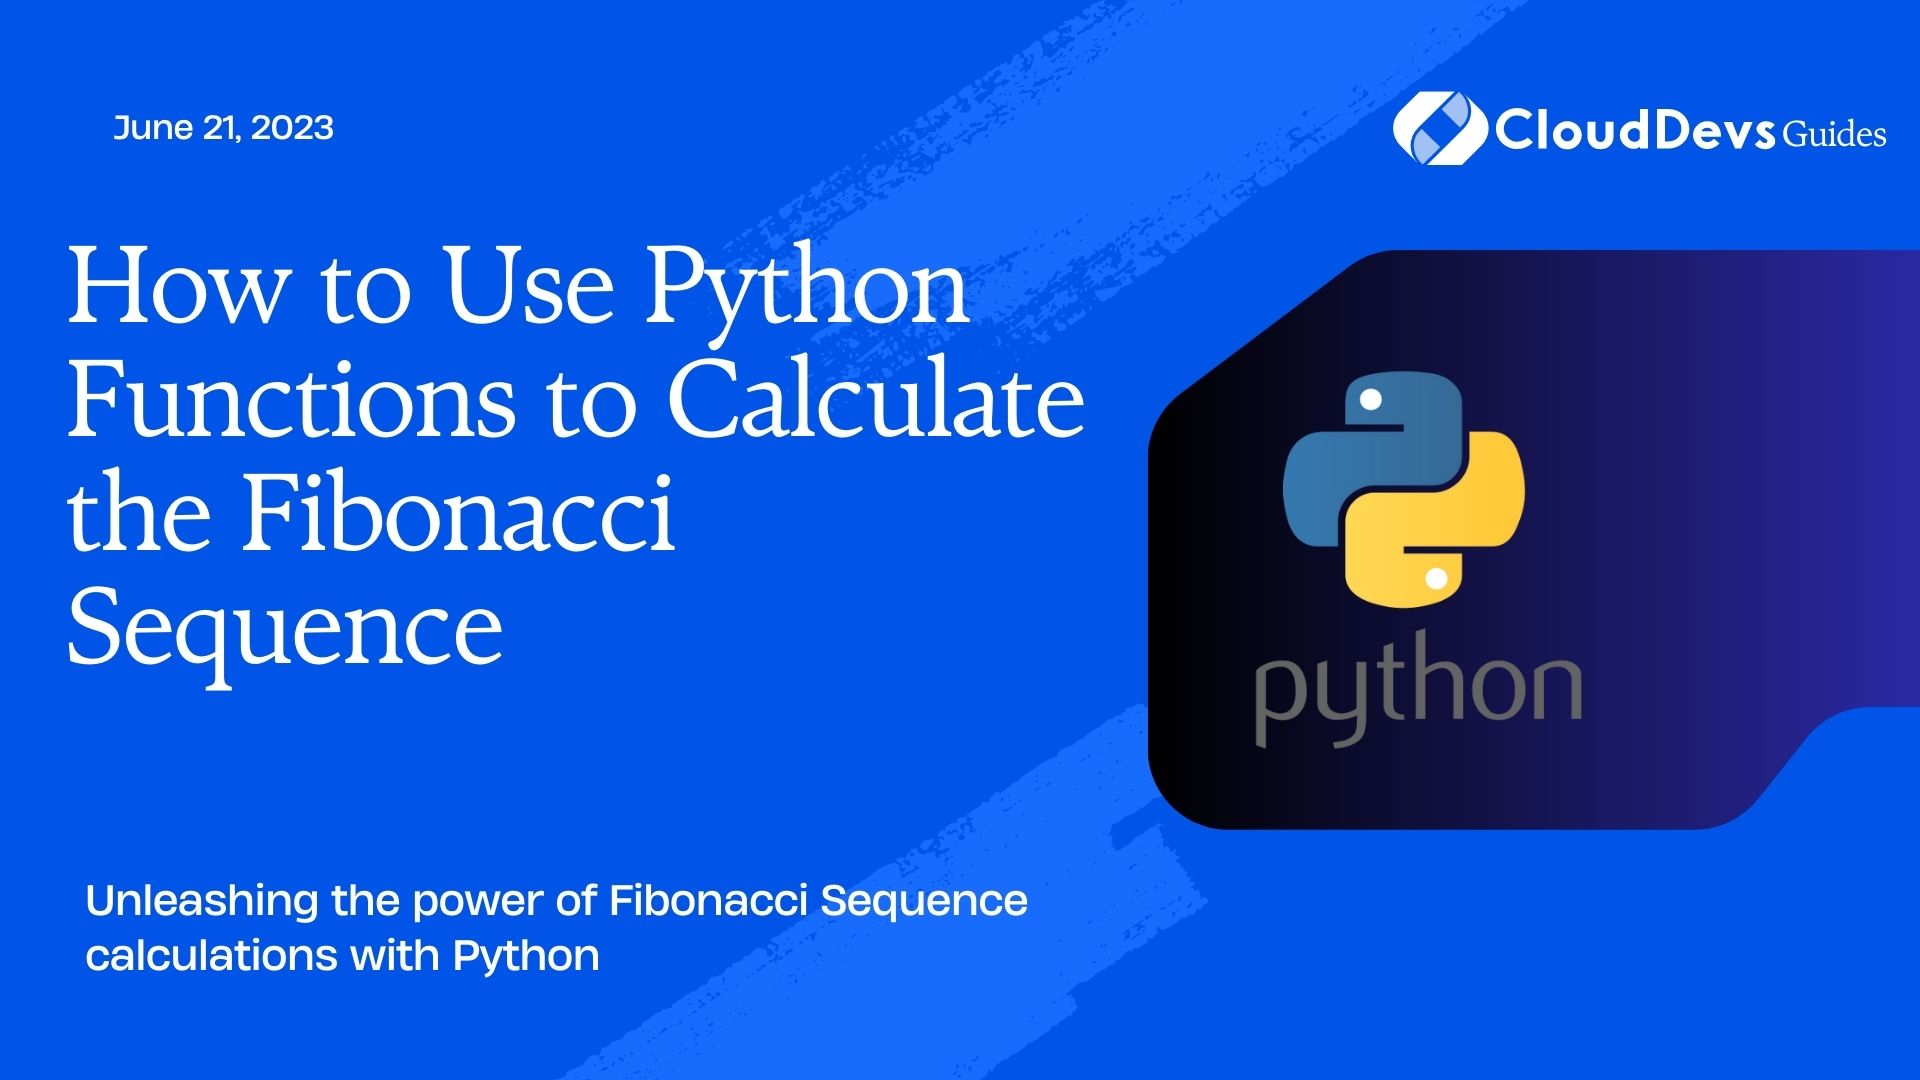 How to Use Python Functions to Calculate the Fibonacci Sequence